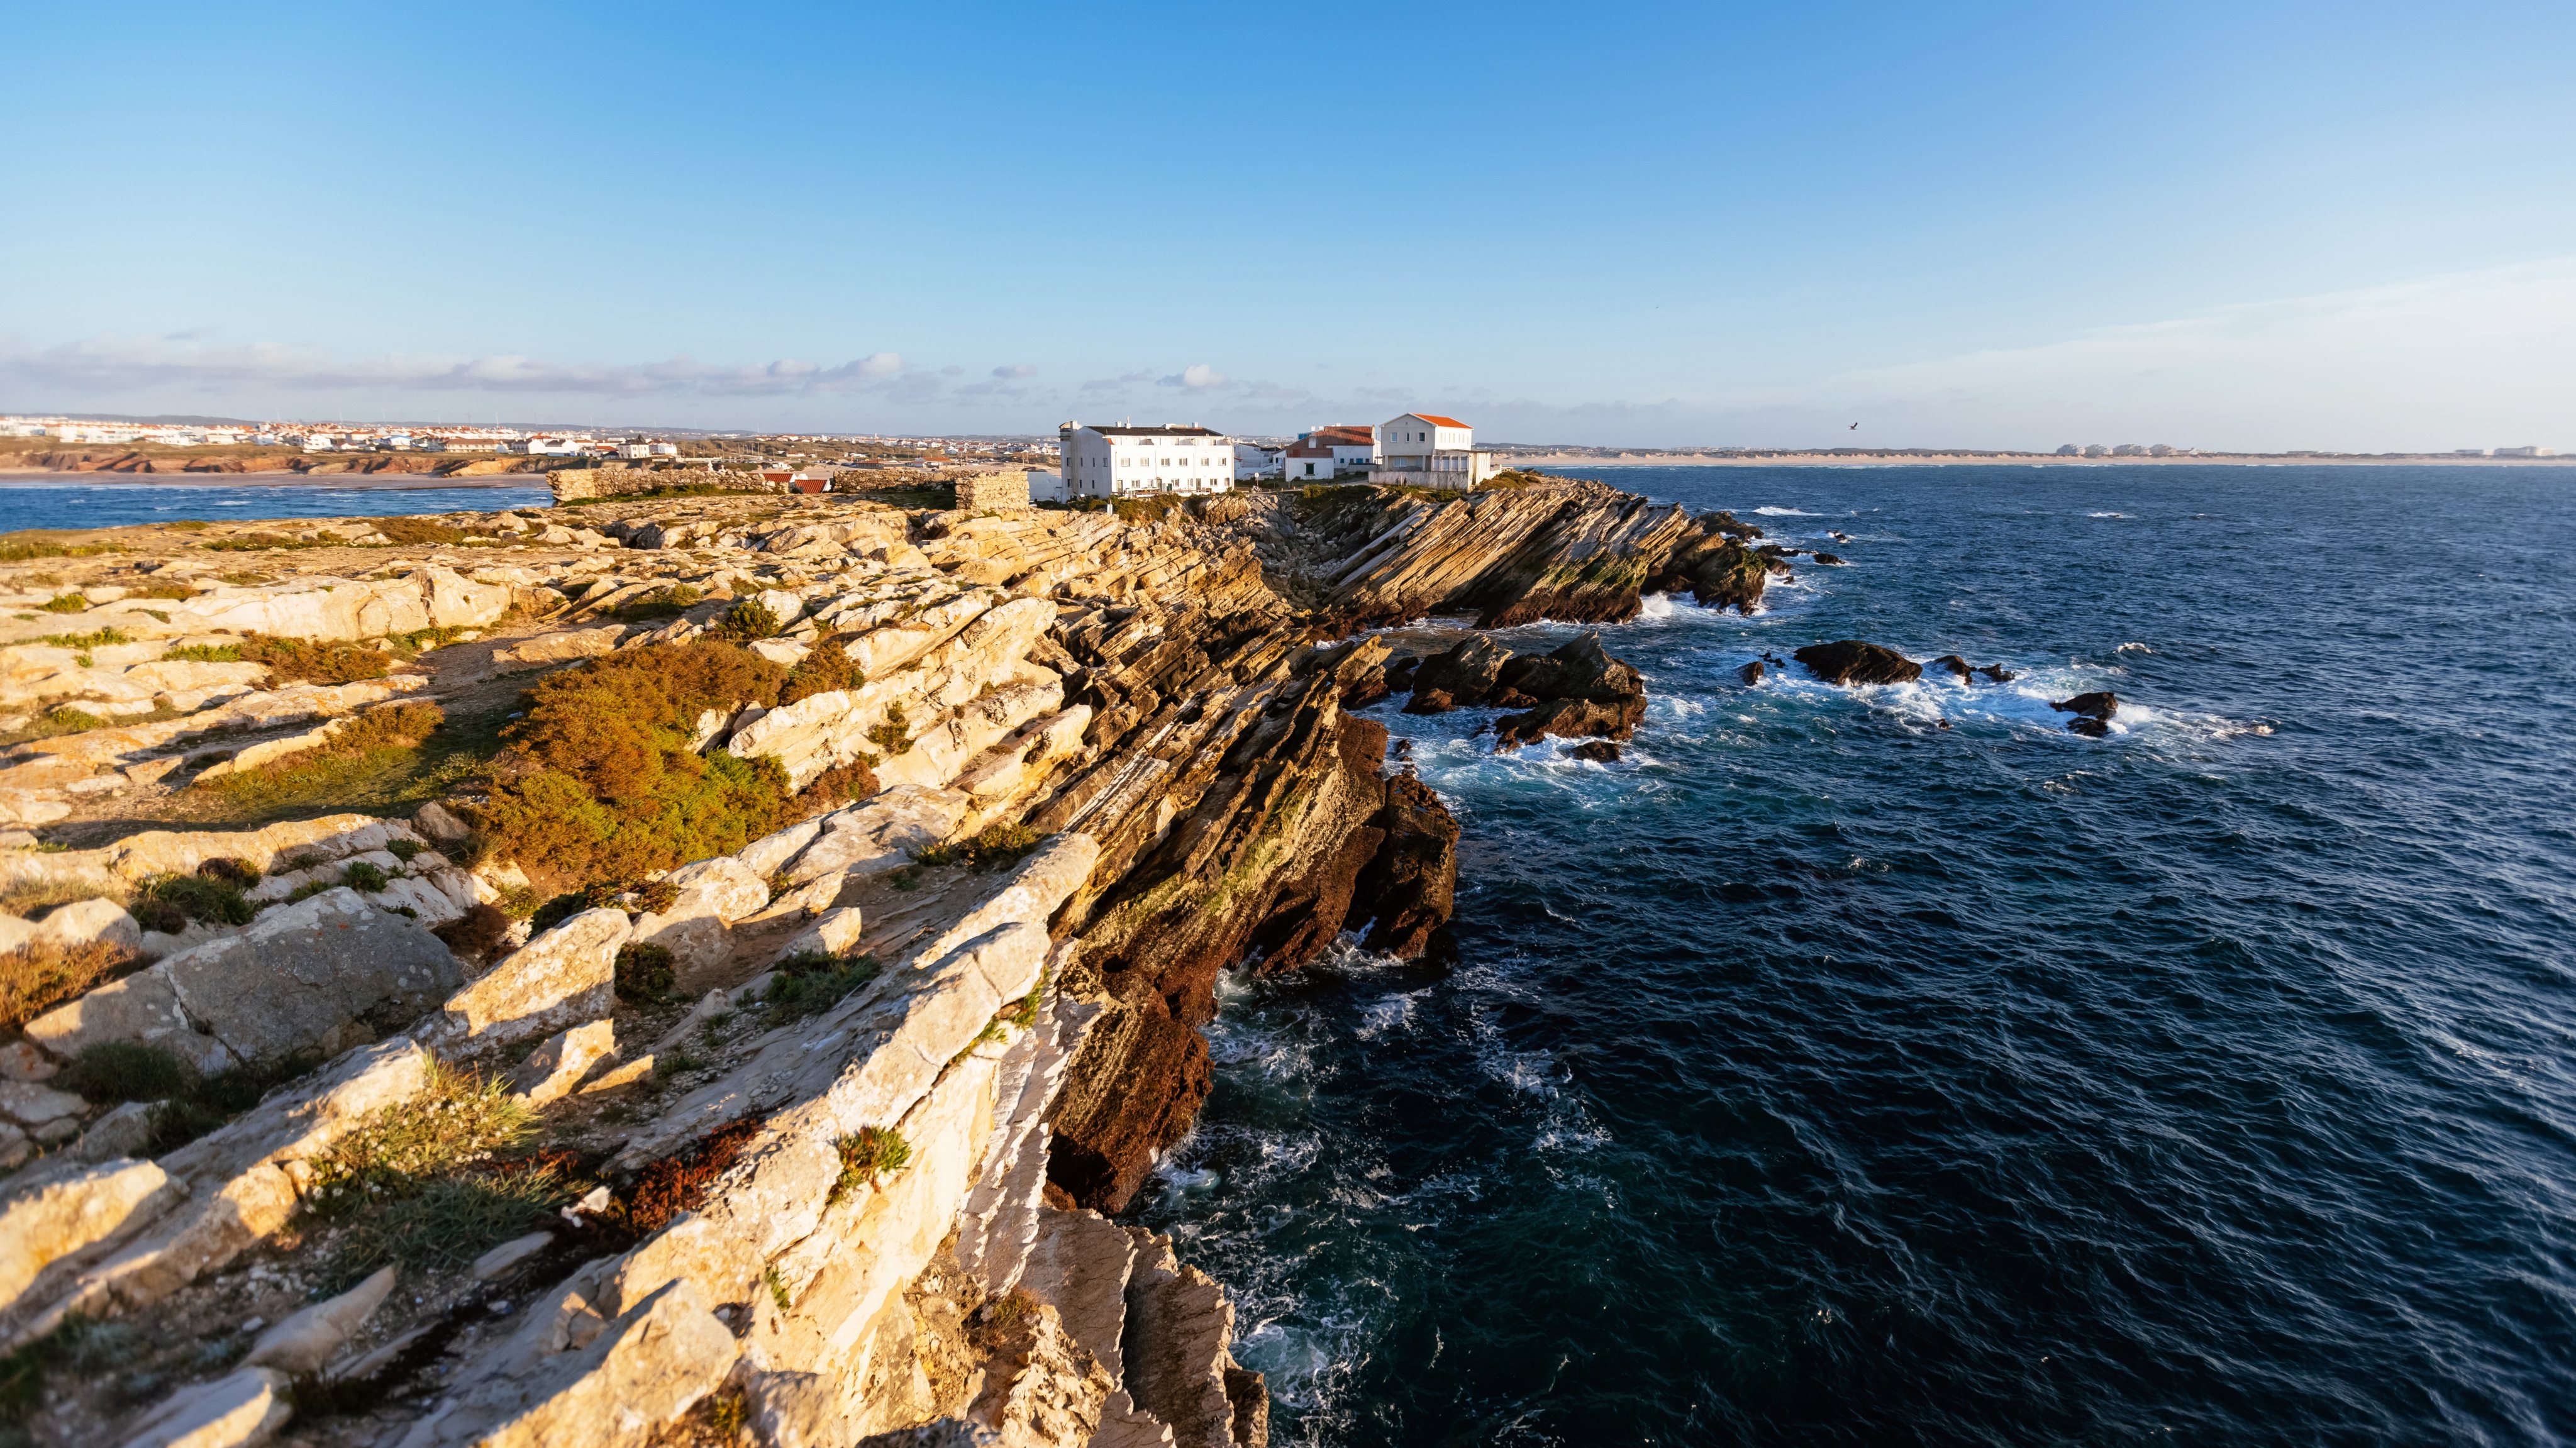 Peniche town on the cliff by the ocean, Leiria District, Portugal